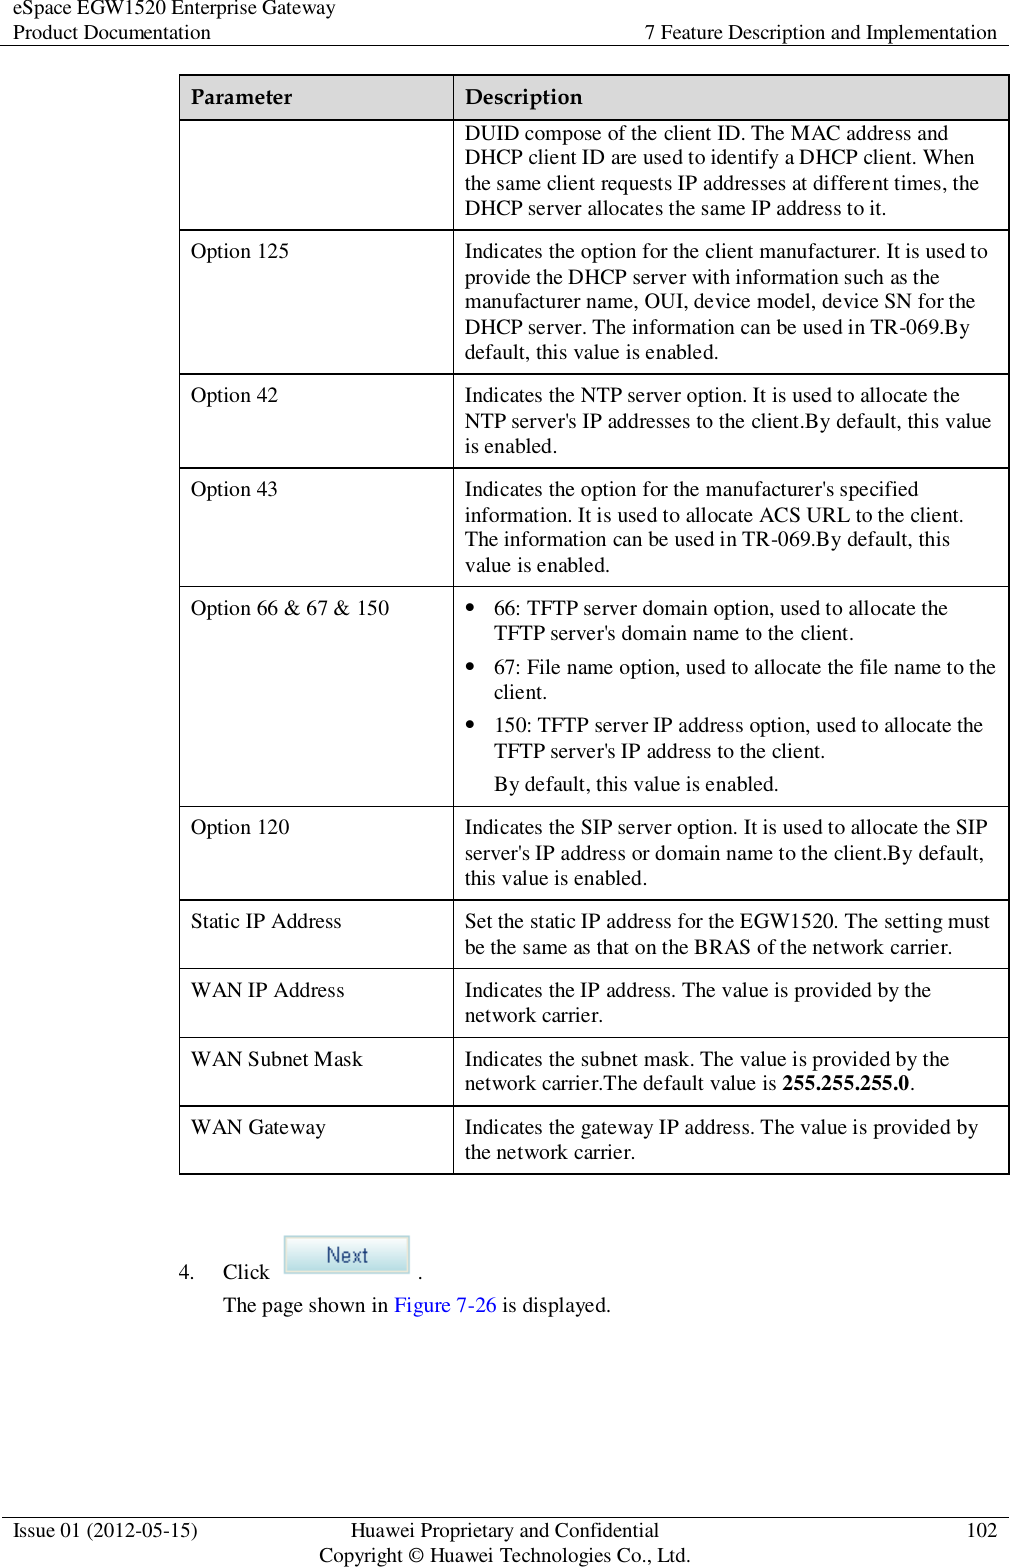 eSpace EGW1520 Enterprise Gateway Product Documentation 7 Feature Description and Implementation  Issue 01 (2012-05-15) Huawei Proprietary and Confidential                                     Copyright © Huawei Technologies Co., Ltd. 102  Parameter Description DUID compose of the client ID. The MAC address and DHCP client ID are used to identify a DHCP client. When the same client requests IP addresses at different times, the DHCP server allocates the same IP address to it. Option 125 Indicates the option for the client manufacturer. It is used to provide the DHCP server with information such as the manufacturer name, OUI, device model, device SN for the DHCP server. The information can be used in TR-069.By default, this value is enabled. Option 42 Indicates the NTP server option. It is used to allocate the NTP server&apos;s IP addresses to the client.By default, this value is enabled. Option 43 Indicates the option for the manufacturer&apos;s specified information. It is used to allocate ACS URL to the client. The information can be used in TR-069.By default, this value is enabled. Option 66 &amp; 67 &amp; 150  66: TFTP server domain option, used to allocate the TFTP server&apos;s domain name to the client.  67: File name option, used to allocate the file name to the client.  150: TFTP server IP address option, used to allocate the TFTP server&apos;s IP address to the client. By default, this value is enabled. Option 120 Indicates the SIP server option. It is used to allocate the SIP server&apos;s IP address or domain name to the client.By default, this value is enabled. Static IP Address Set the static IP address for the EGW1520. The setting must be the same as that on the BRAS of the network carrier. WAN IP Address Indicates the IP address. The value is provided by the network carrier. WAN Subnet Mask Indicates the subnet mask. The value is provided by the network carrier.The default value is 255.255.255.0. WAN Gateway Indicates the gateway IP address. The value is provided by the network carrier.  4. Click  . The page shown in Figure 7-26 is displayed. 